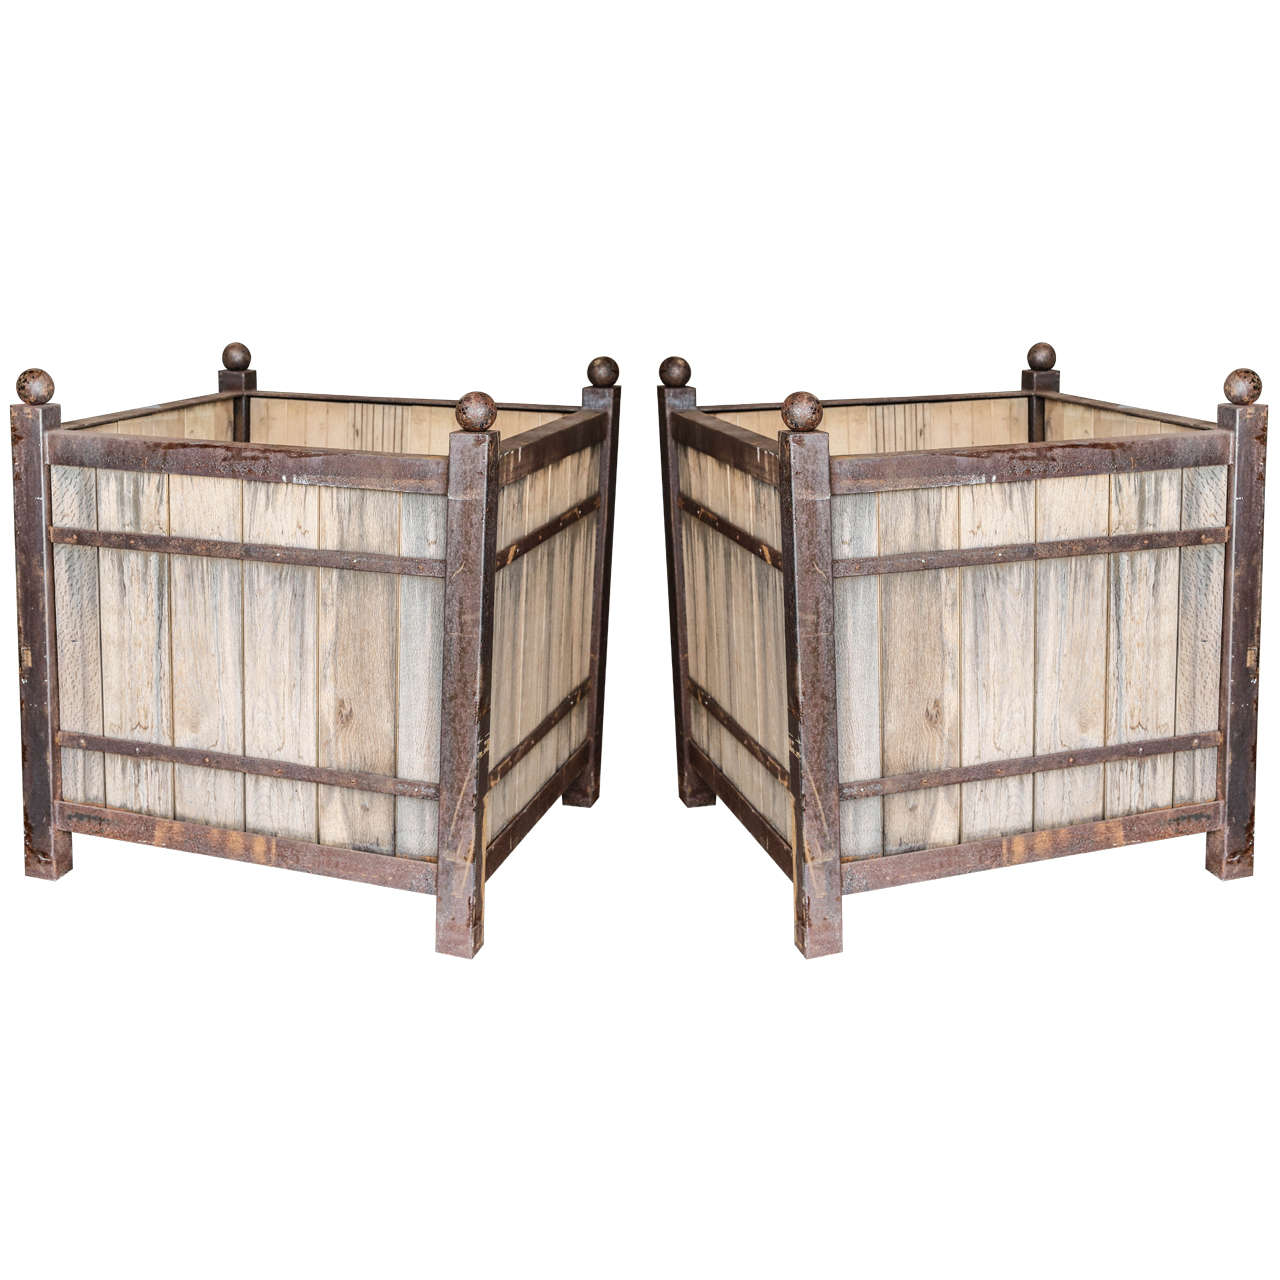 Pair of Iron and Wood Planters